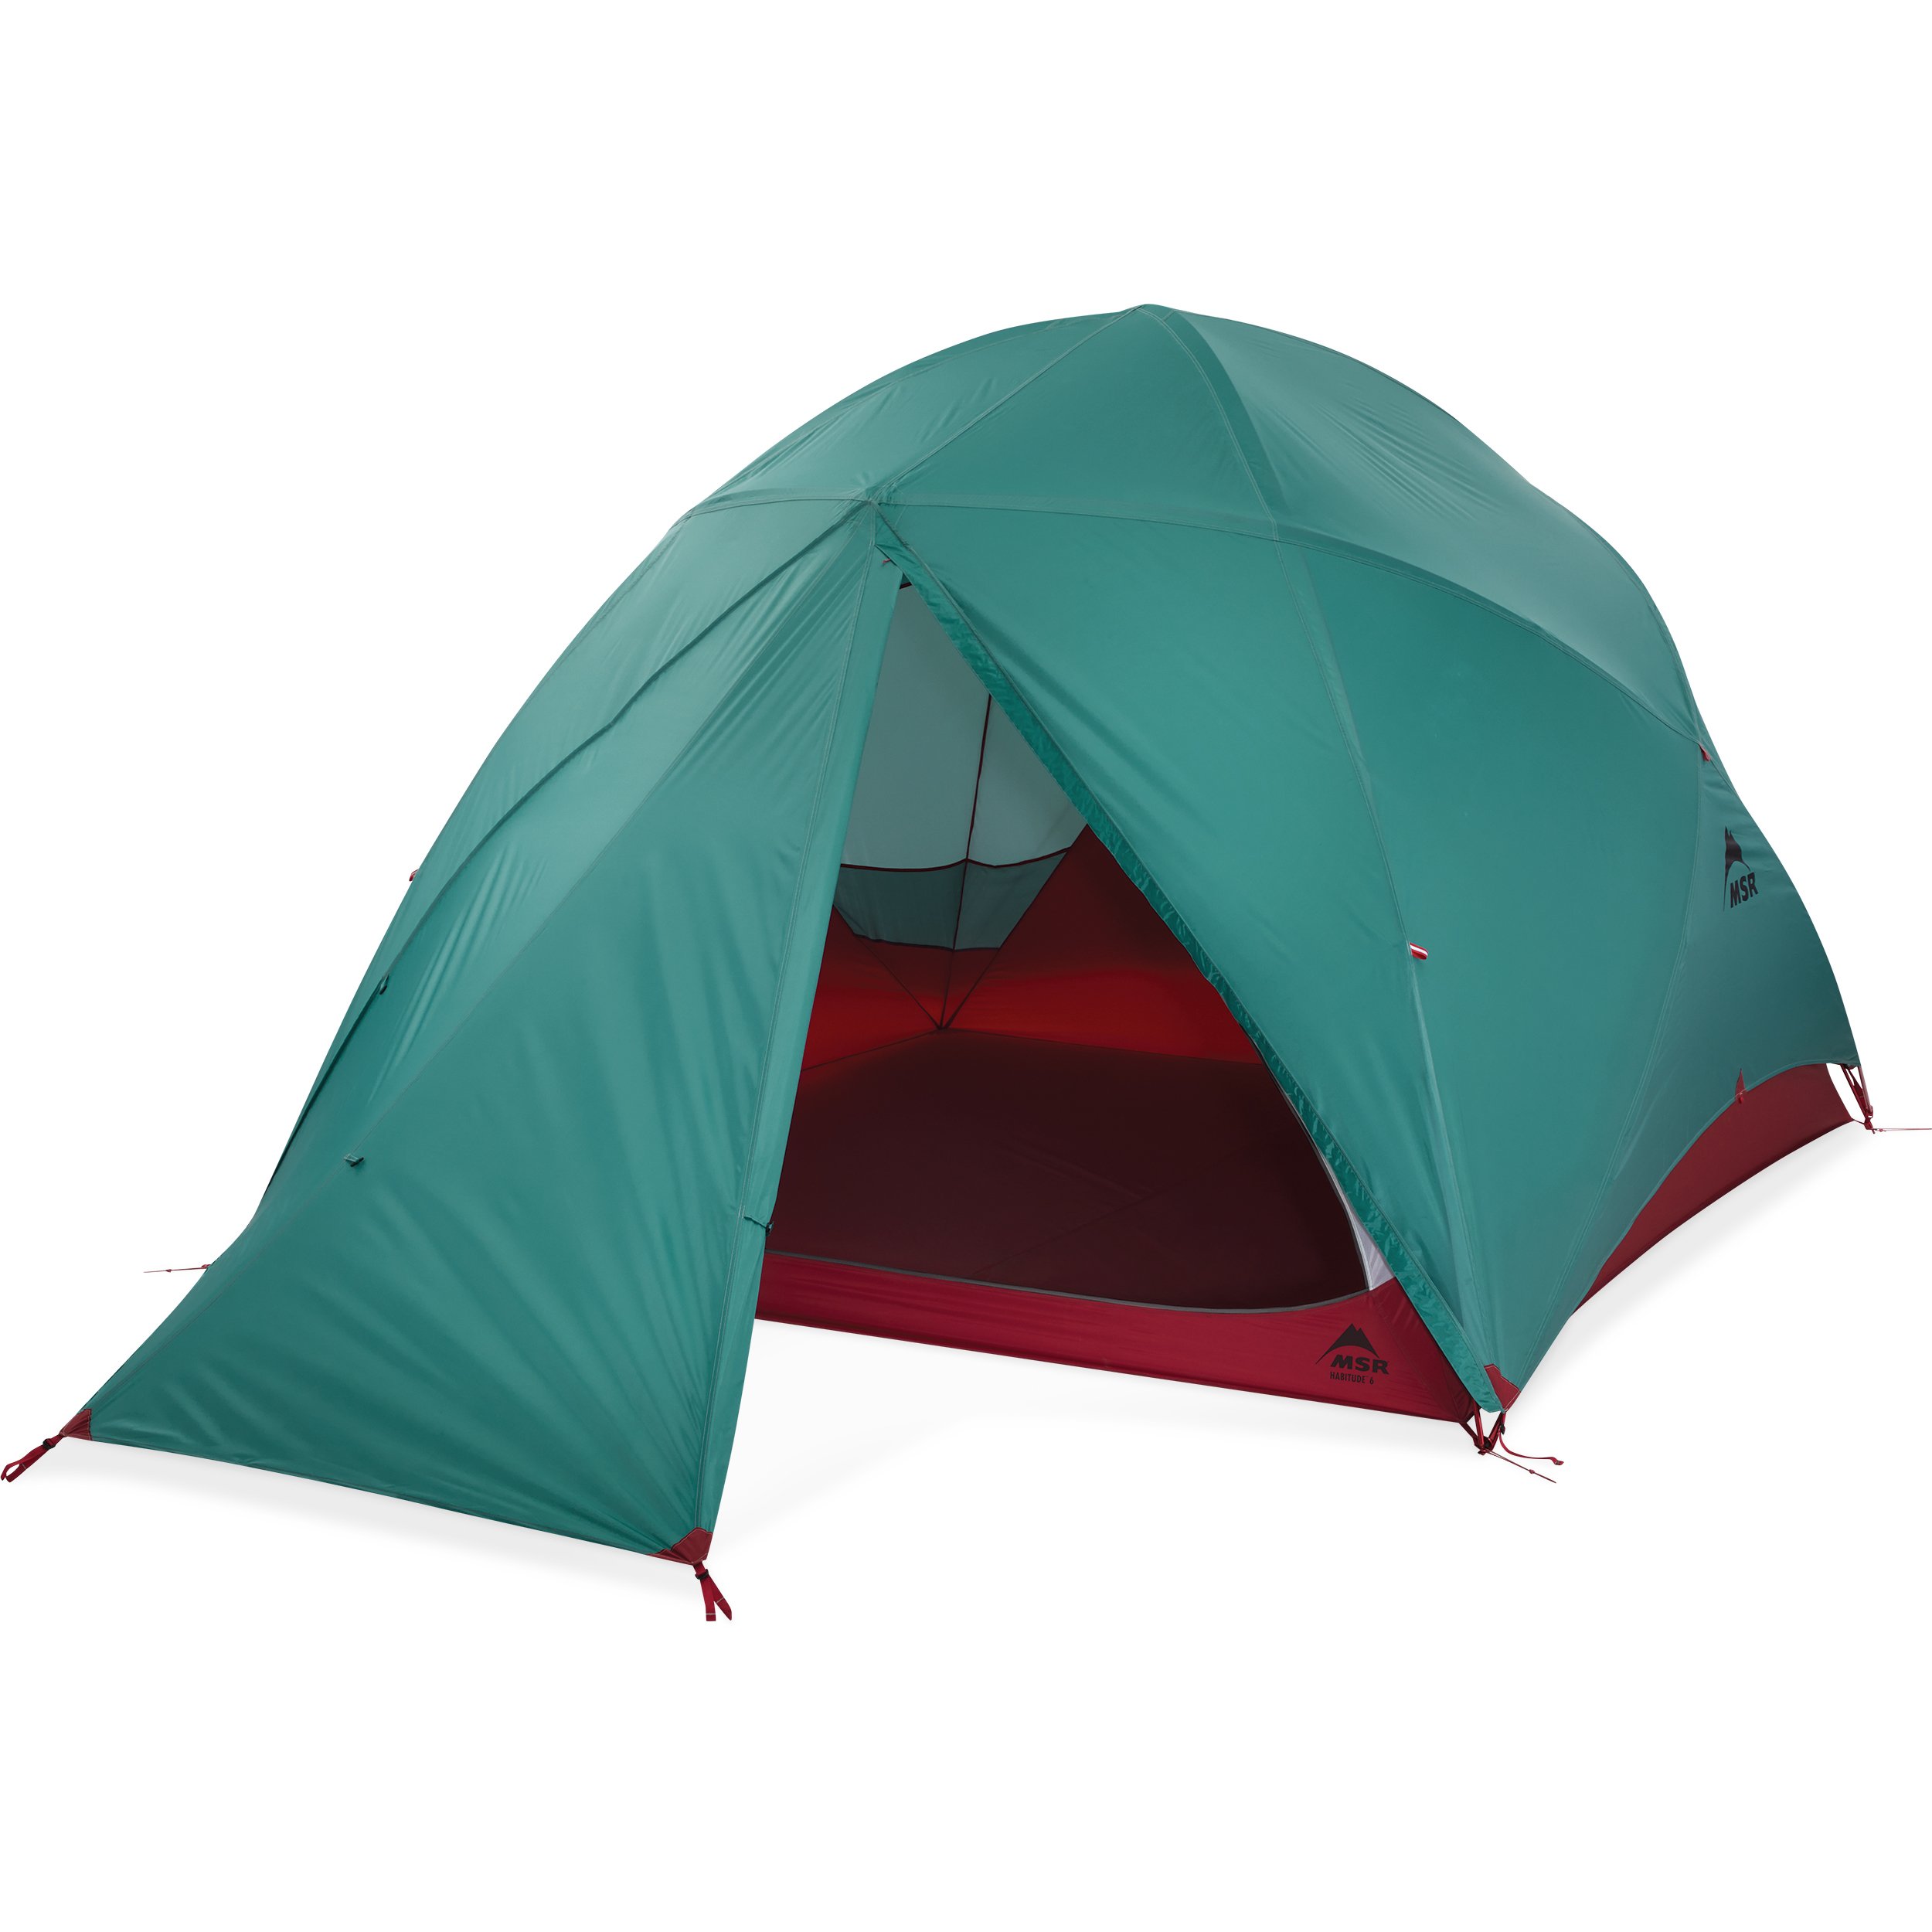 Habitude™ 6 - Family Camping 6-Person Tent |